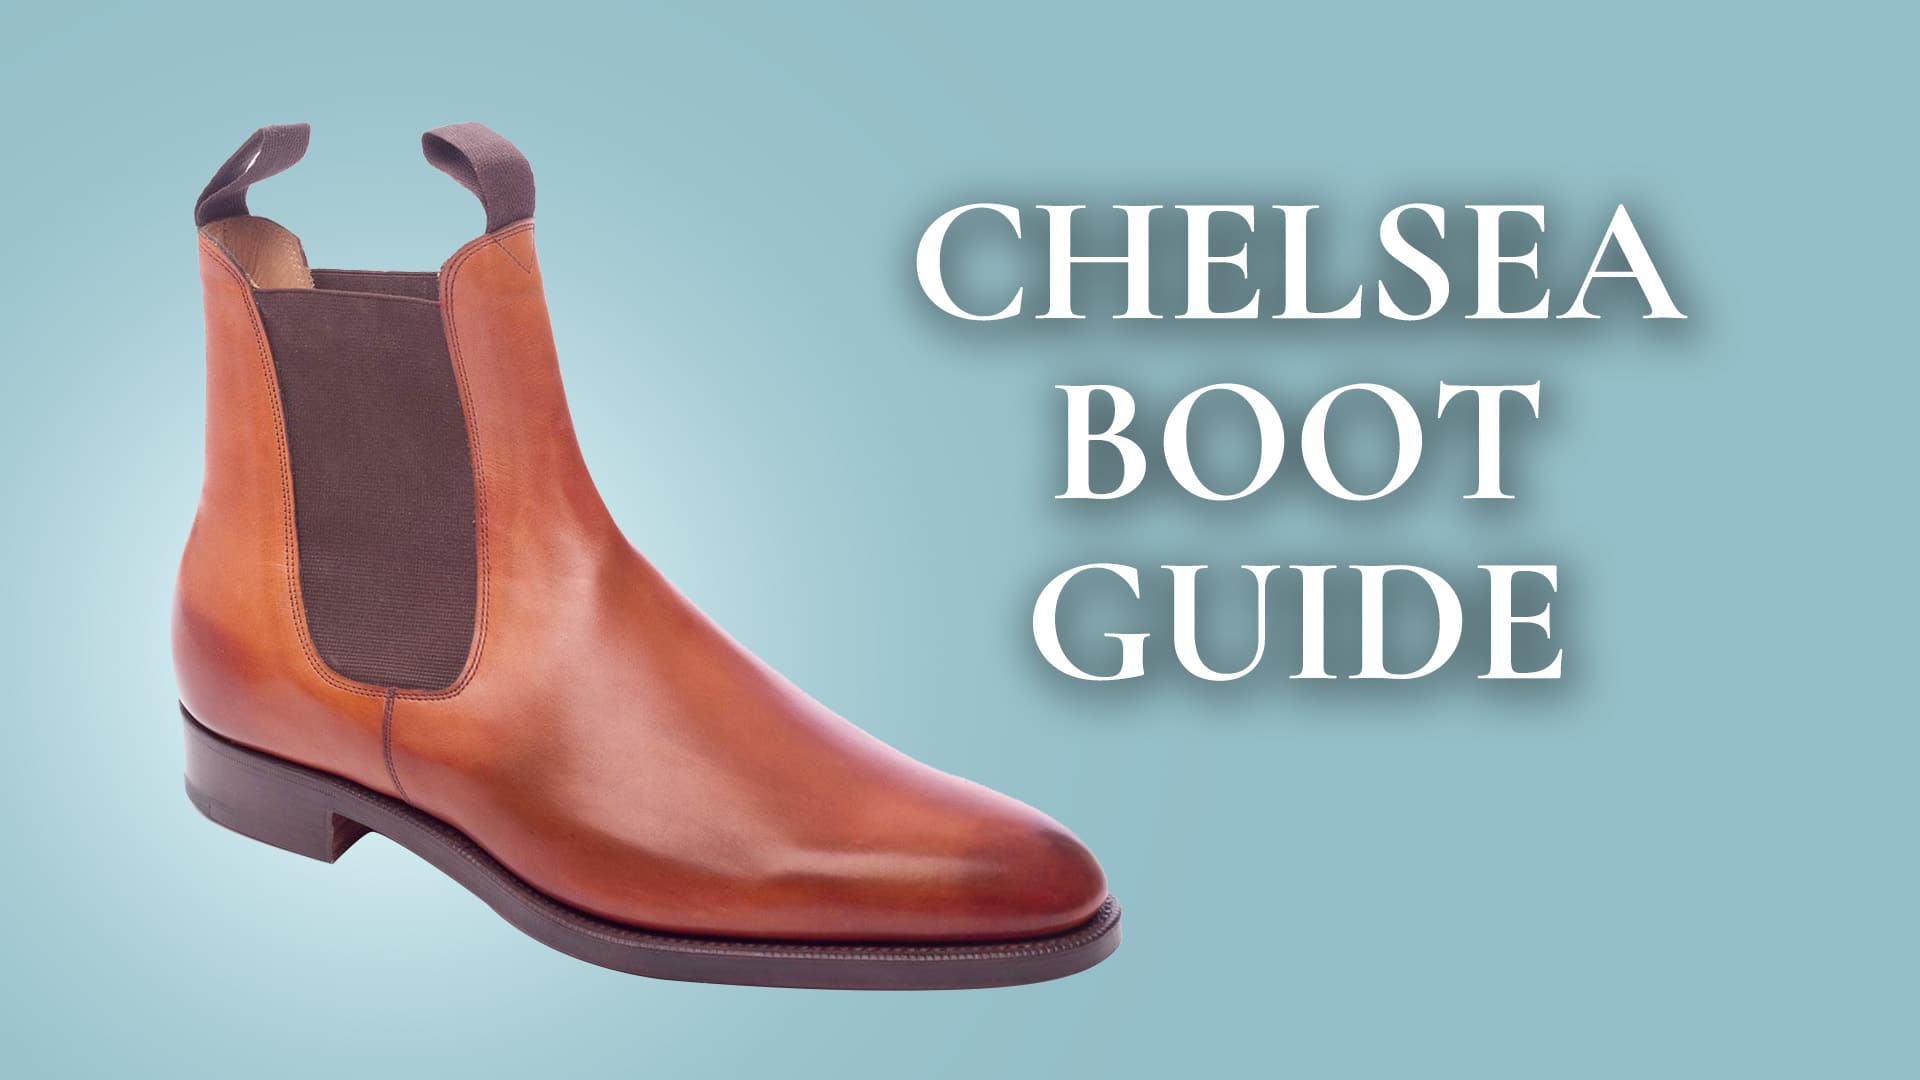 Chelsea Boots Guide | The Classic Men's Boot Explained